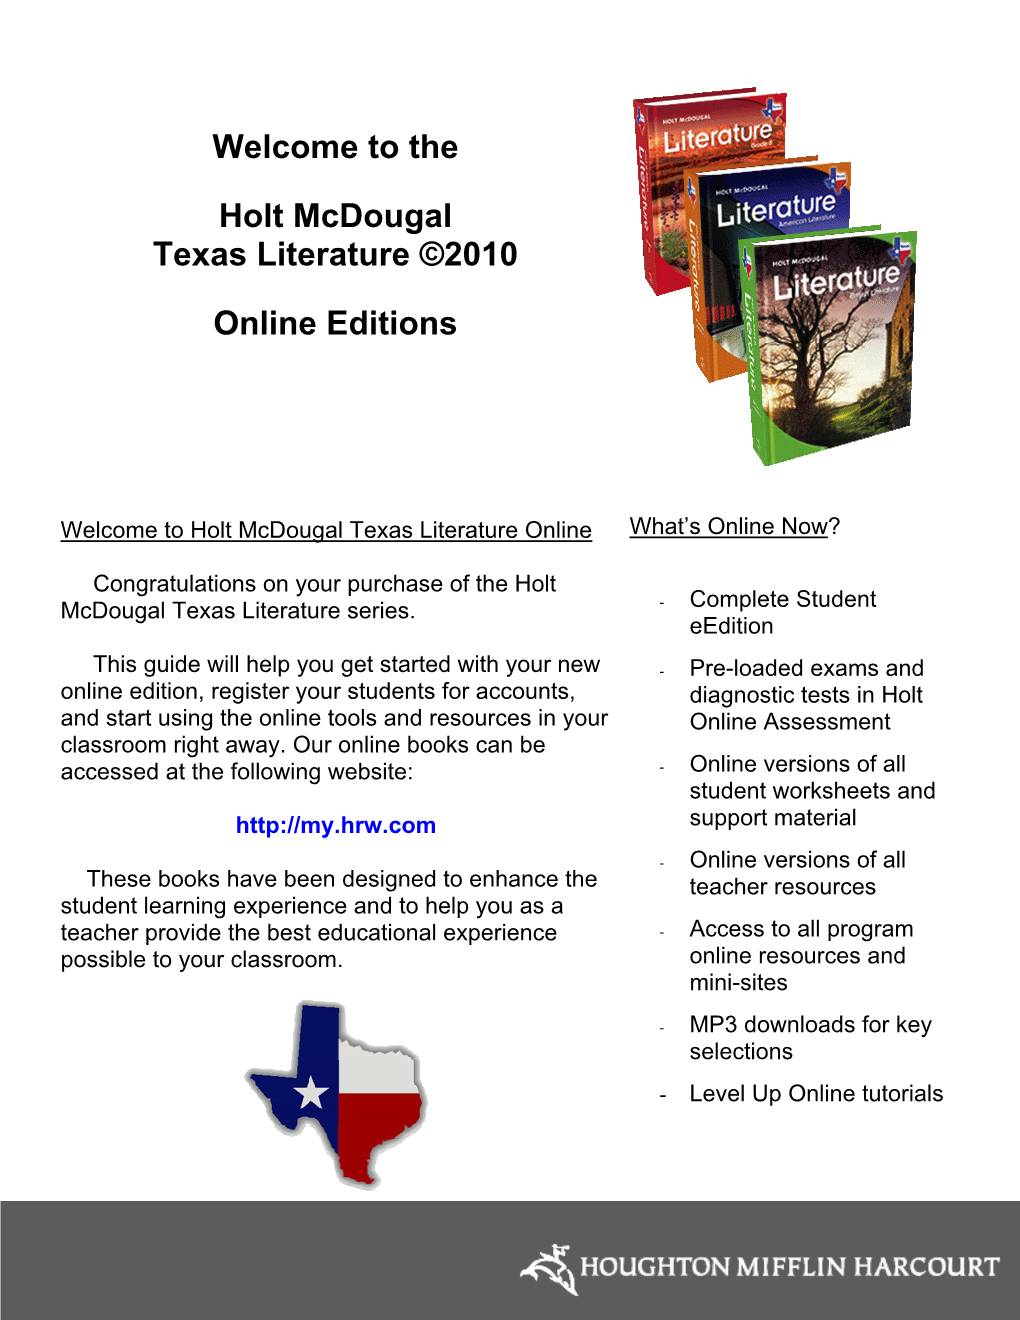 Welcome to the Holt Mcdougal Texas Literature ©2010 Online Editions